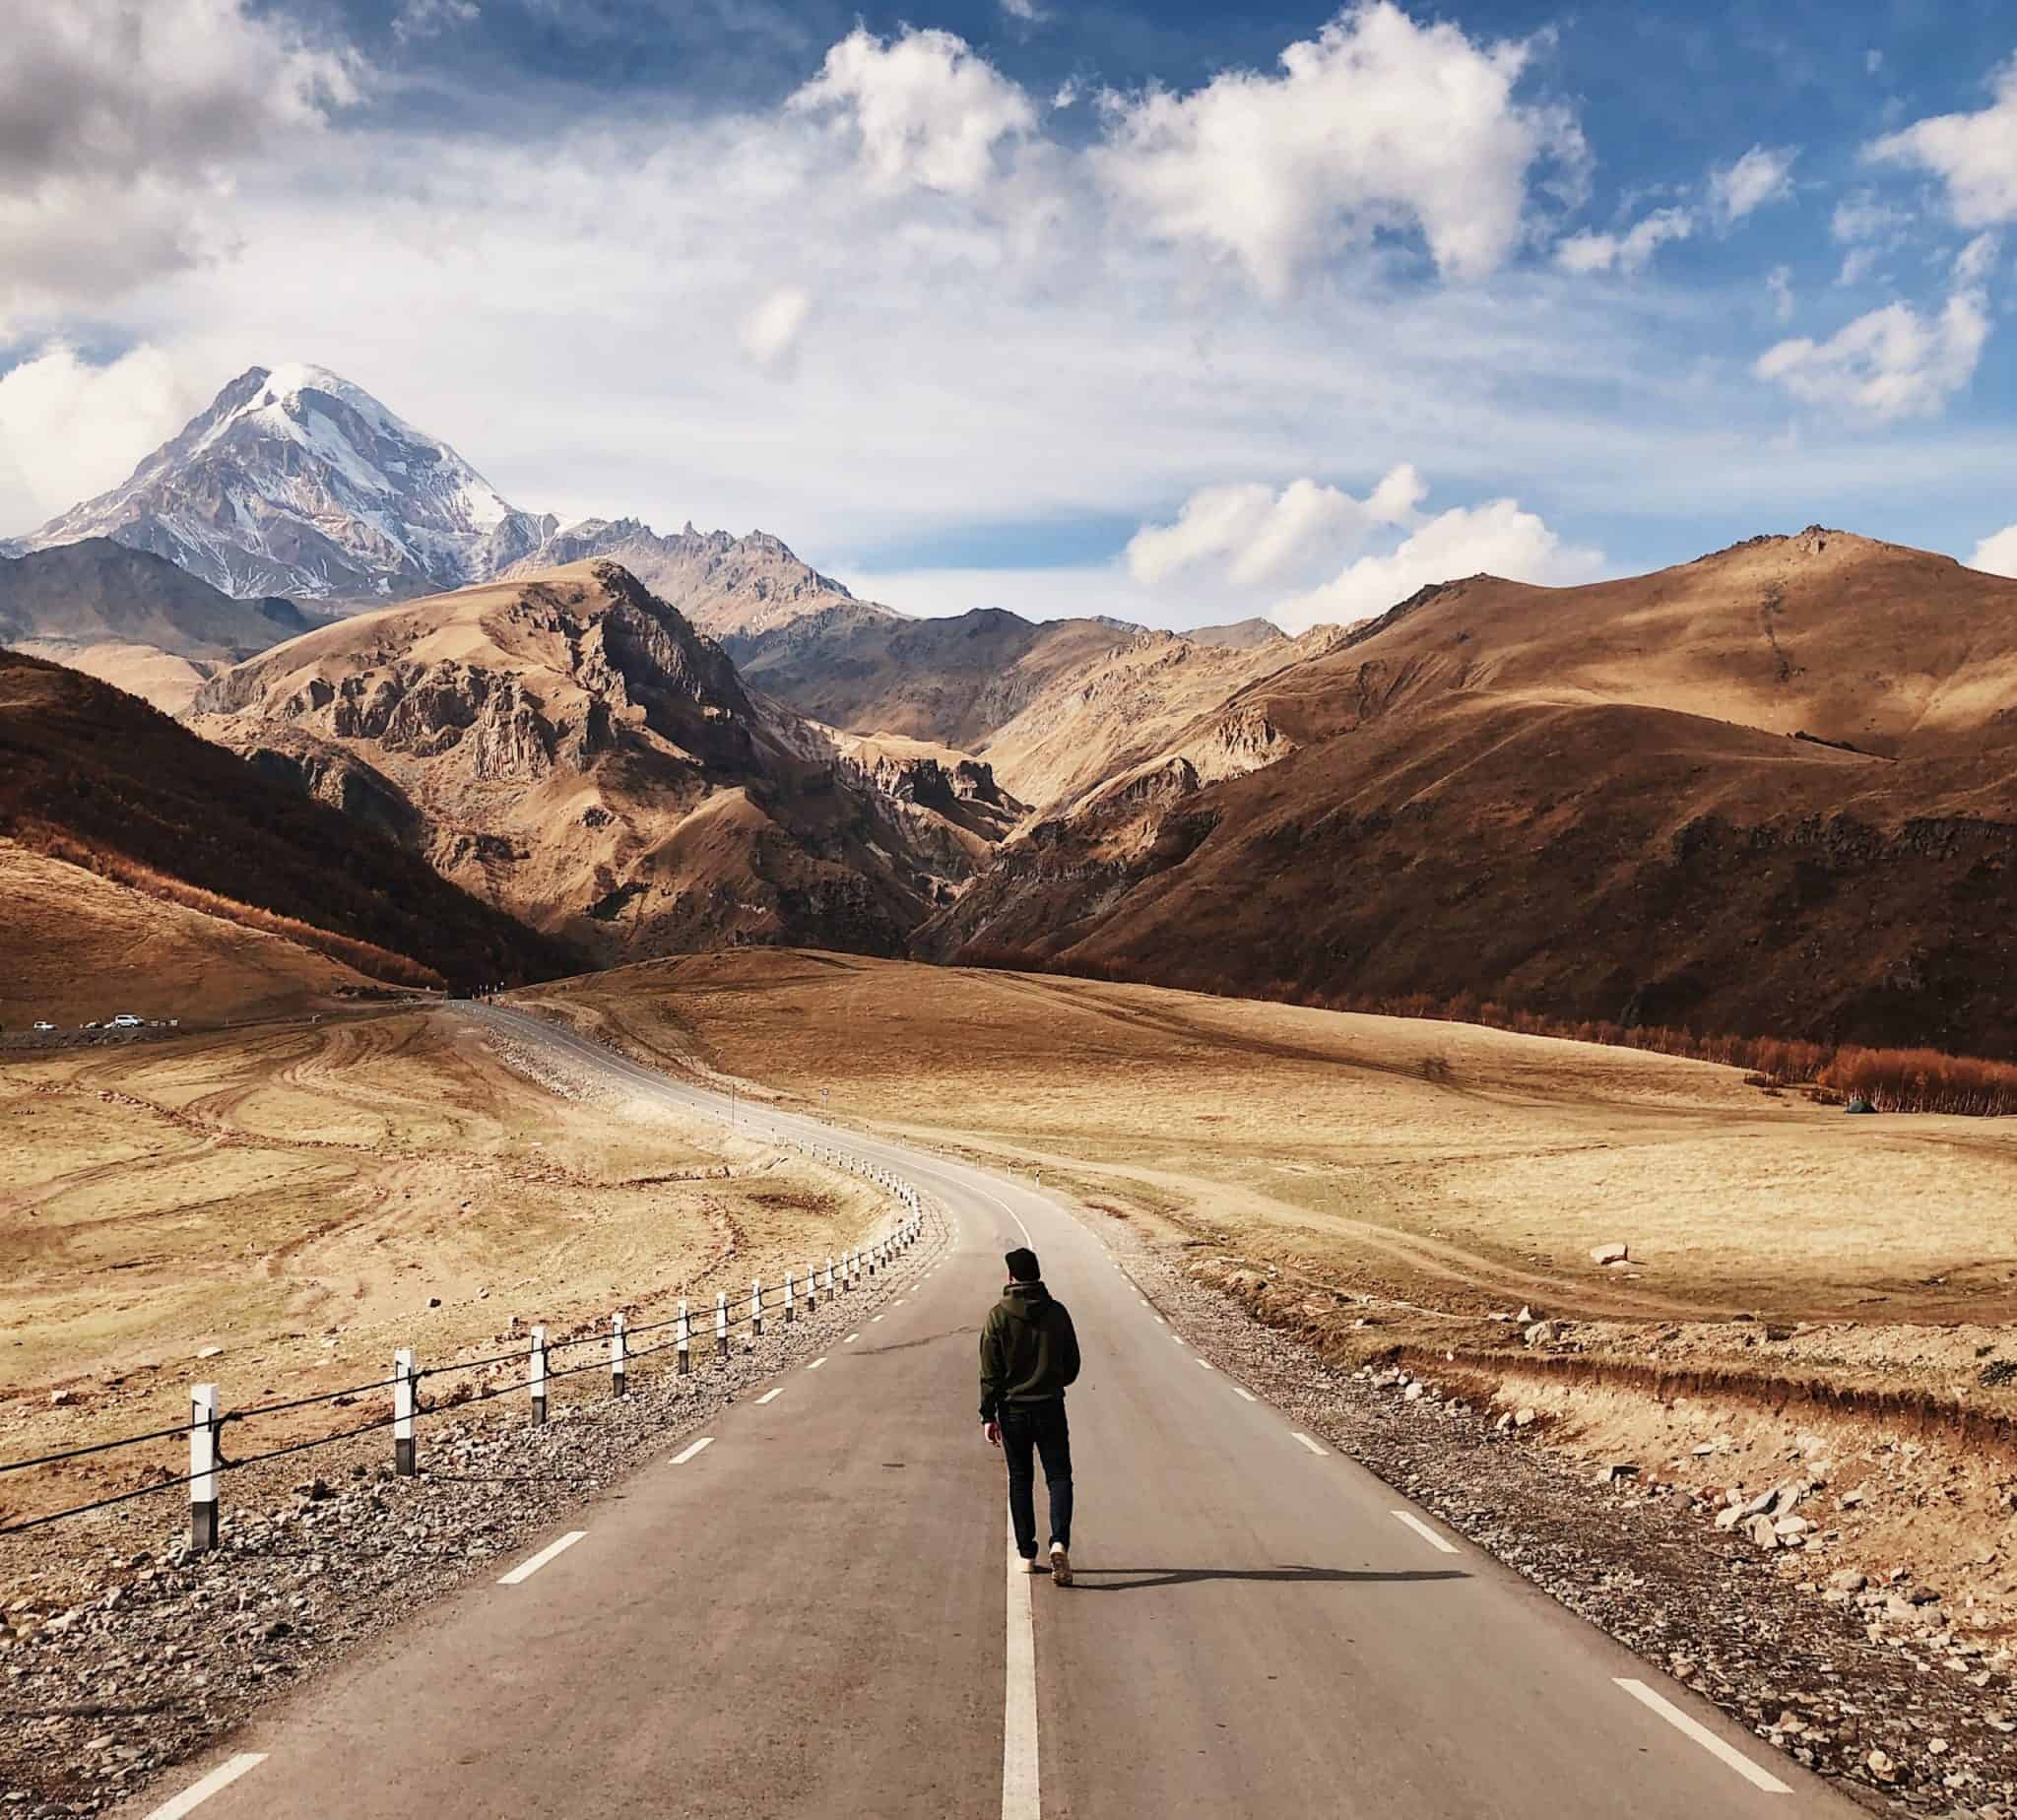 A lone traveler walks down an open road stretching through a majestic mountainous landscape under a vast open sky.